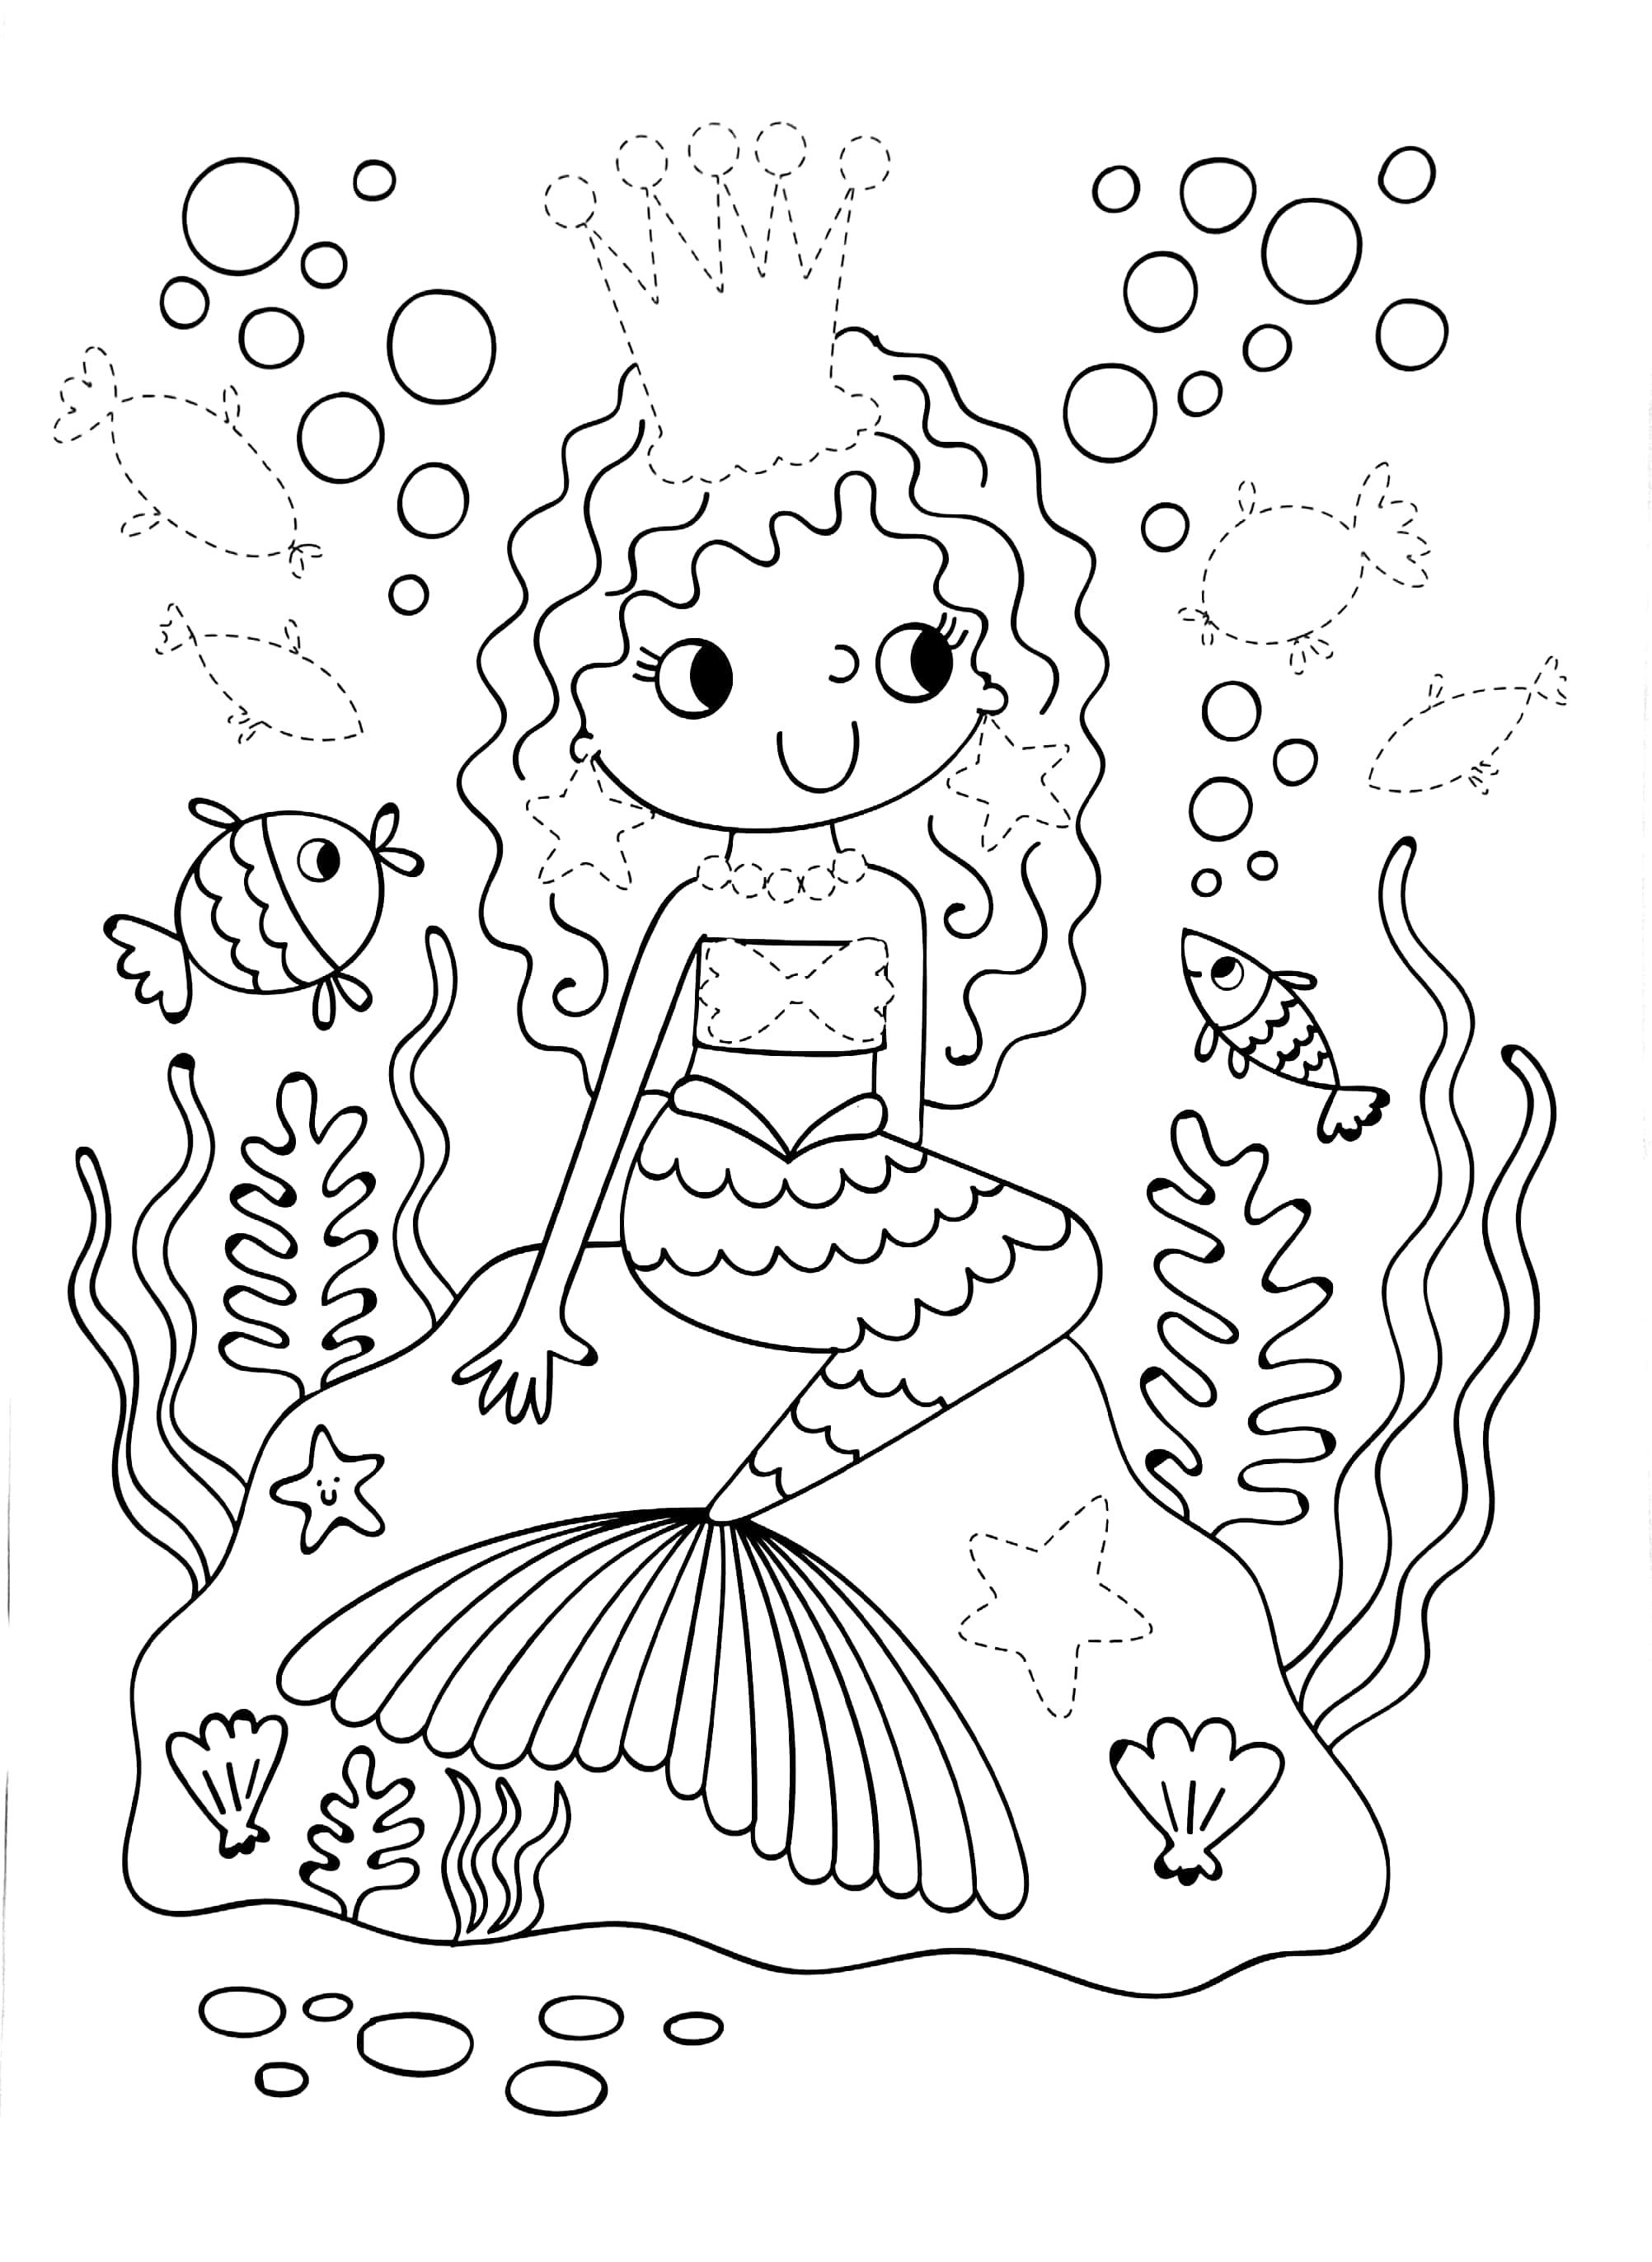 Dress Me Up Colouring And Activity Book - Mermaids